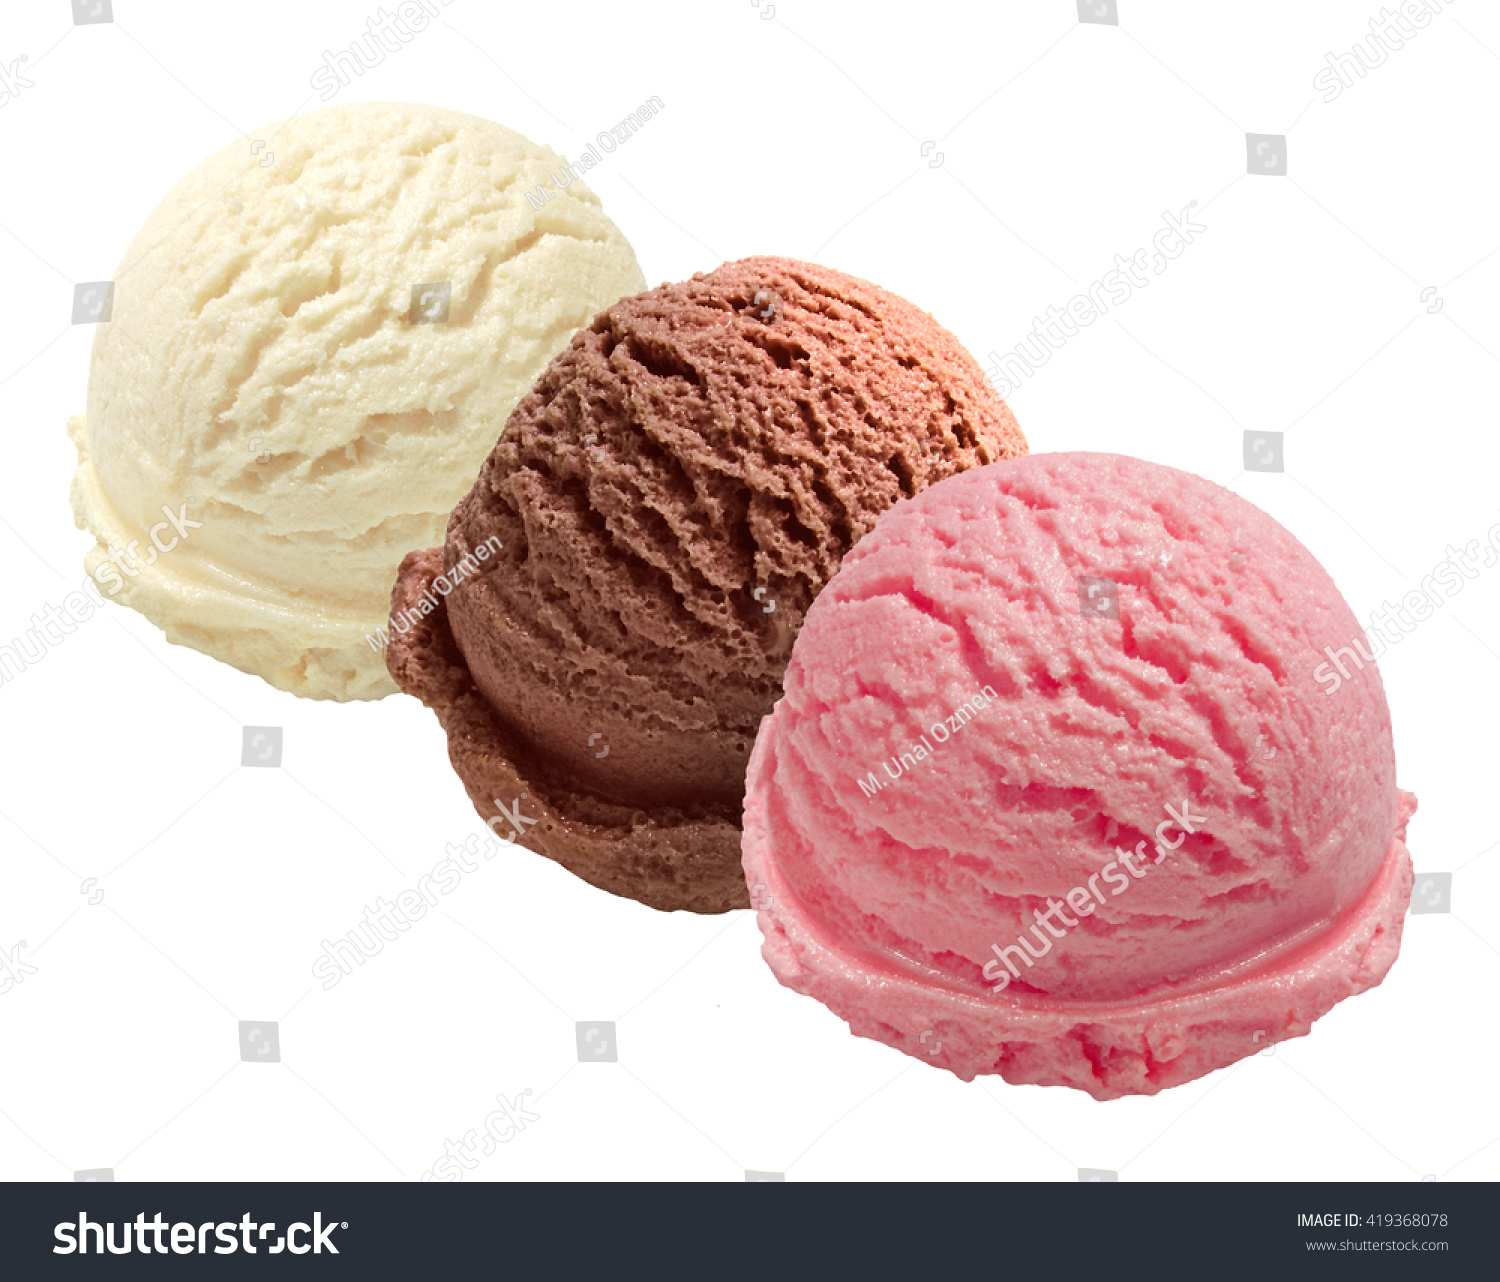 Vanilla, strawberry and chocolate mixed ice cream scoops isolated on white background #419368078